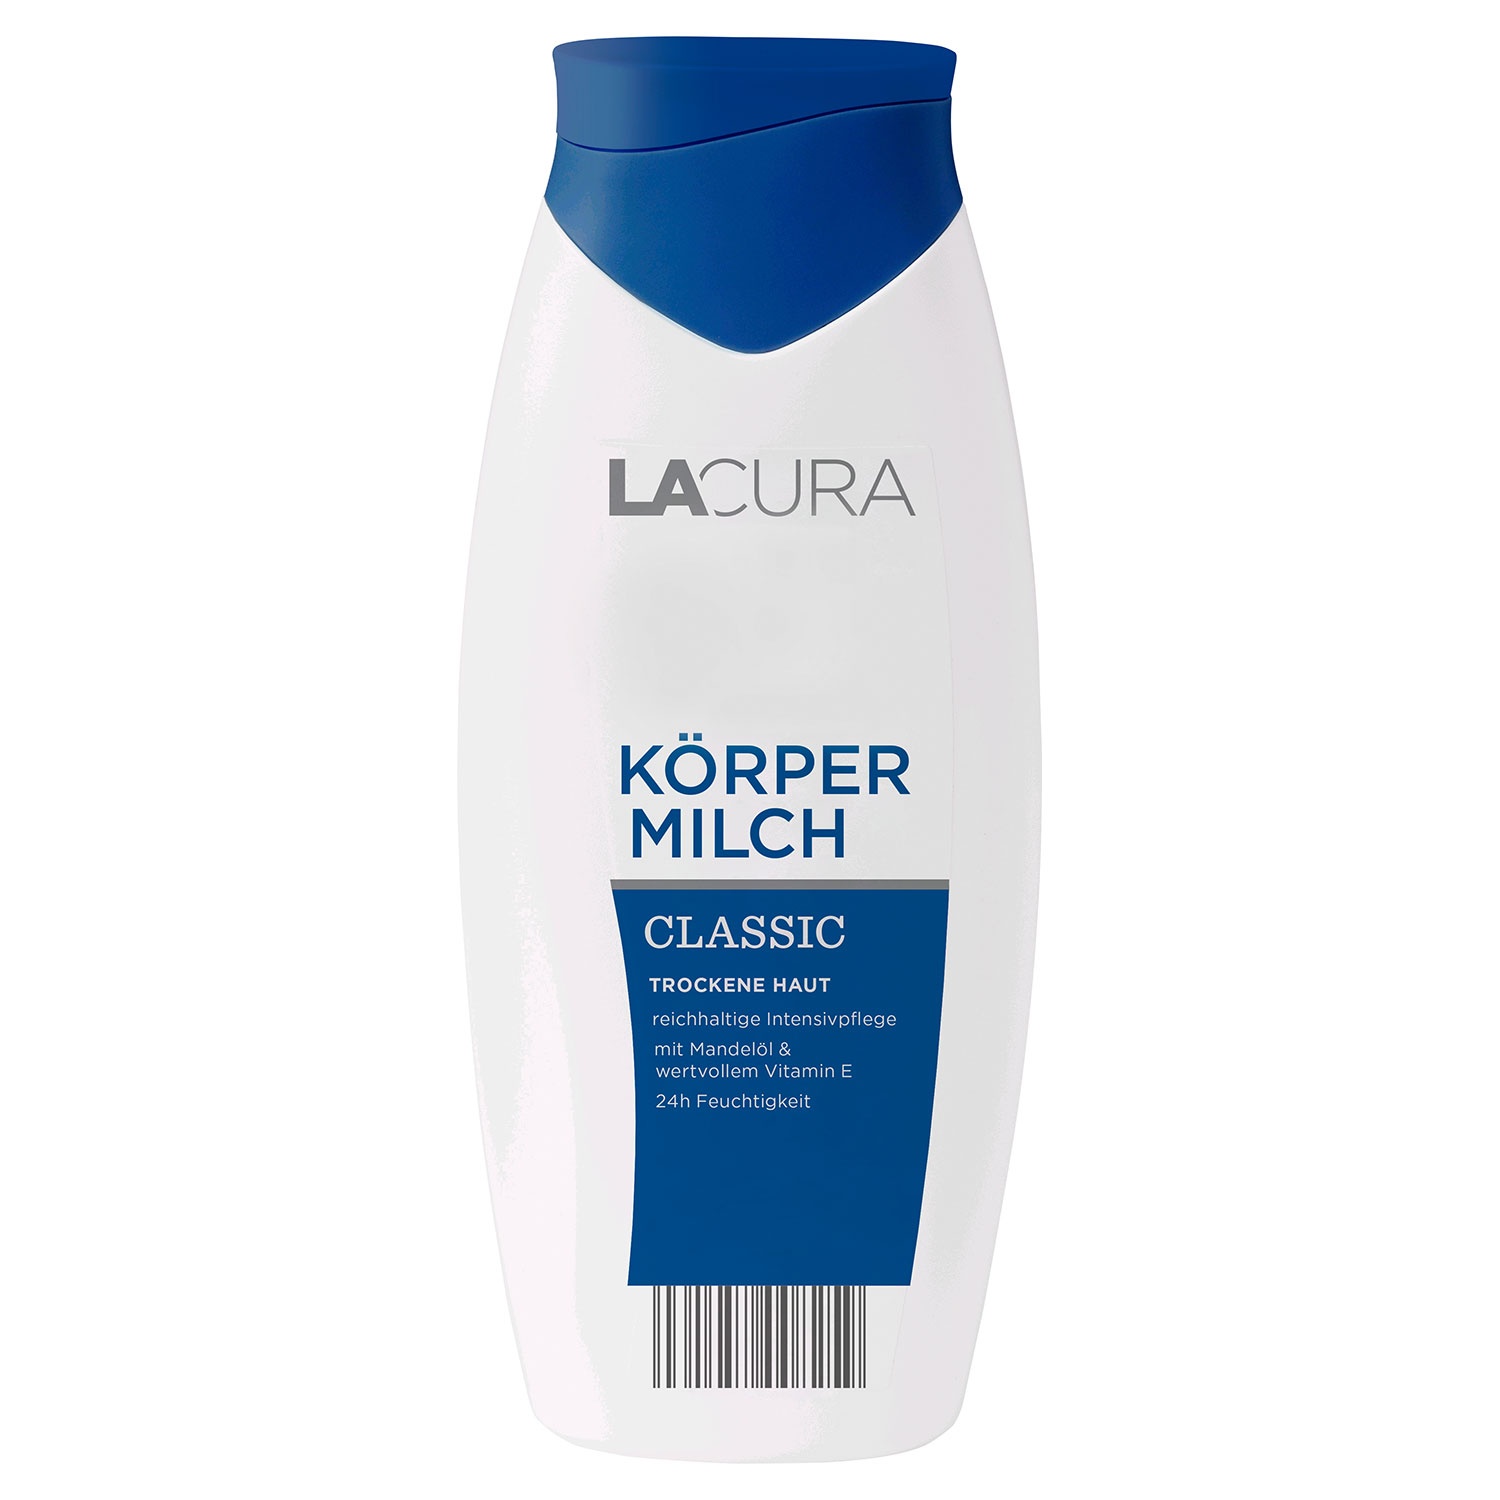 LACURA Körpermilch oder -lotion 500 ml